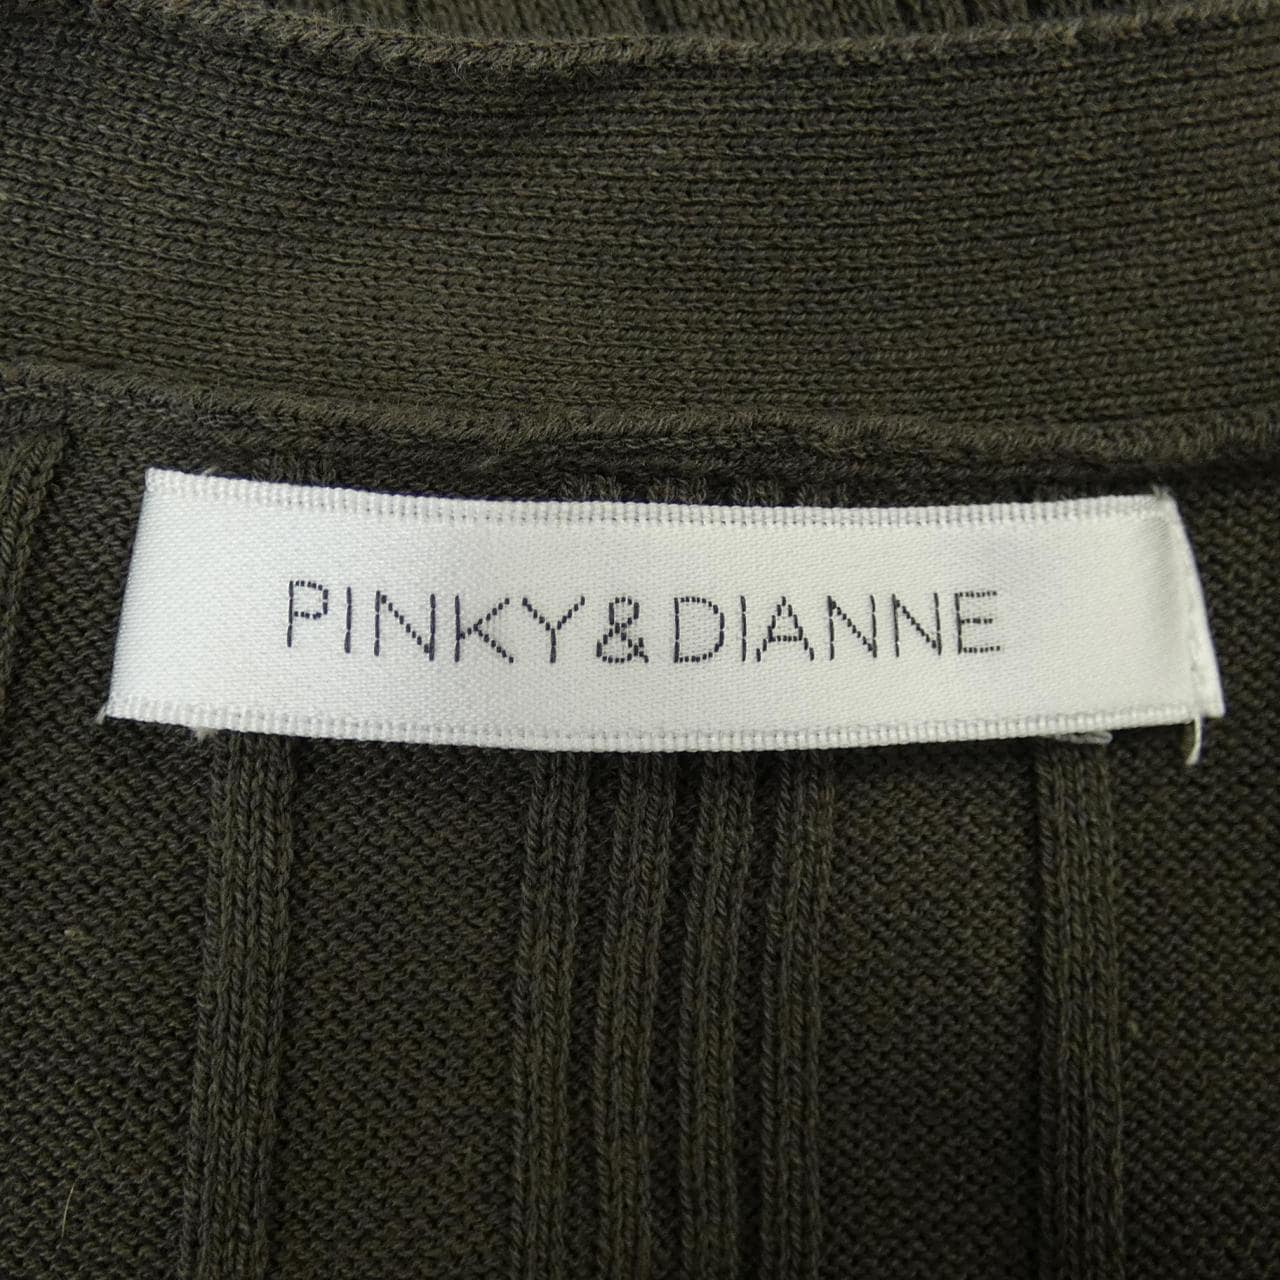 Pinky and Diane Pinky&Dianne合奏